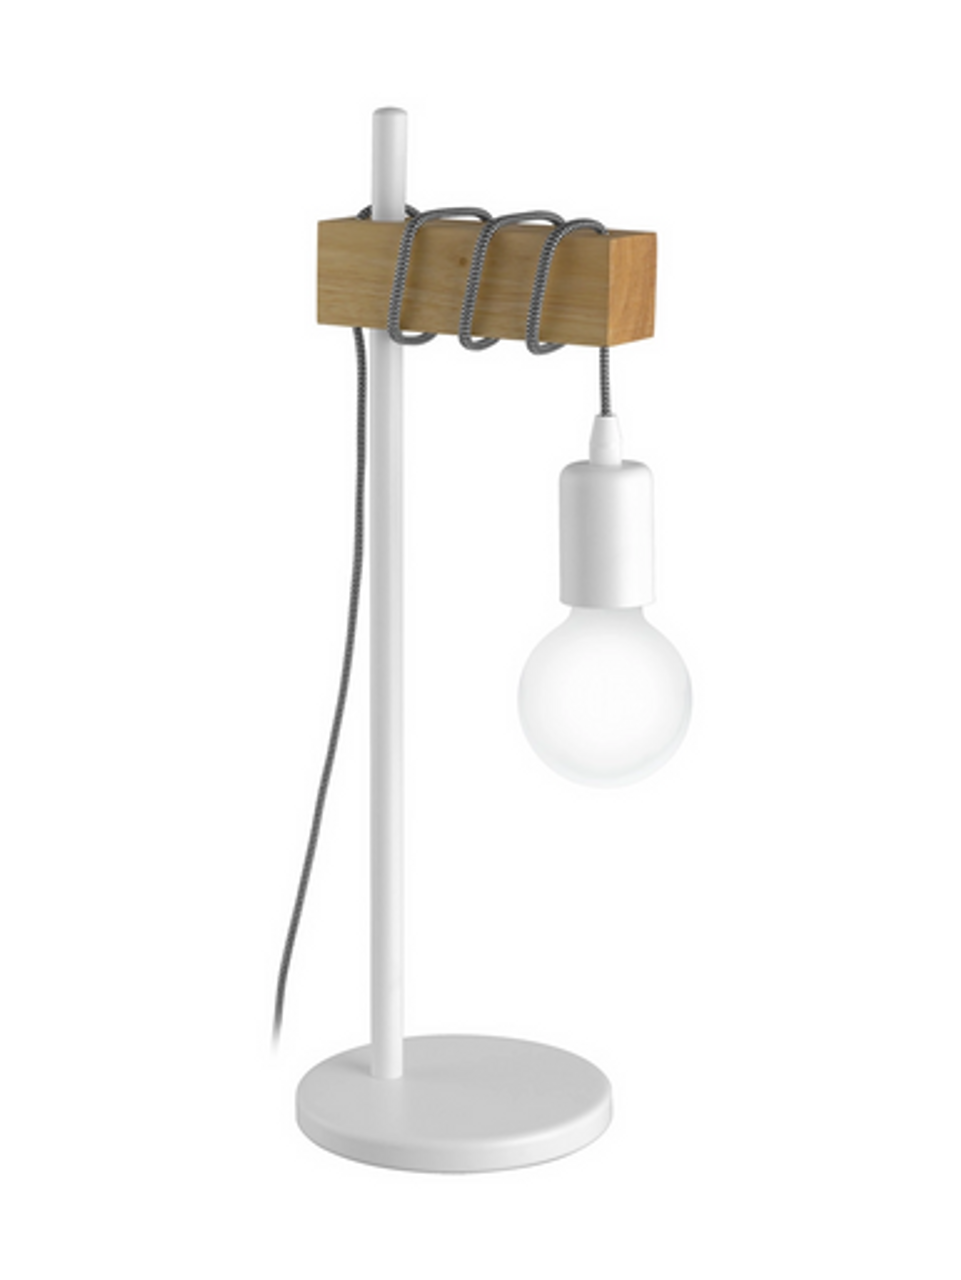 White table lamp with oak-look wood bar